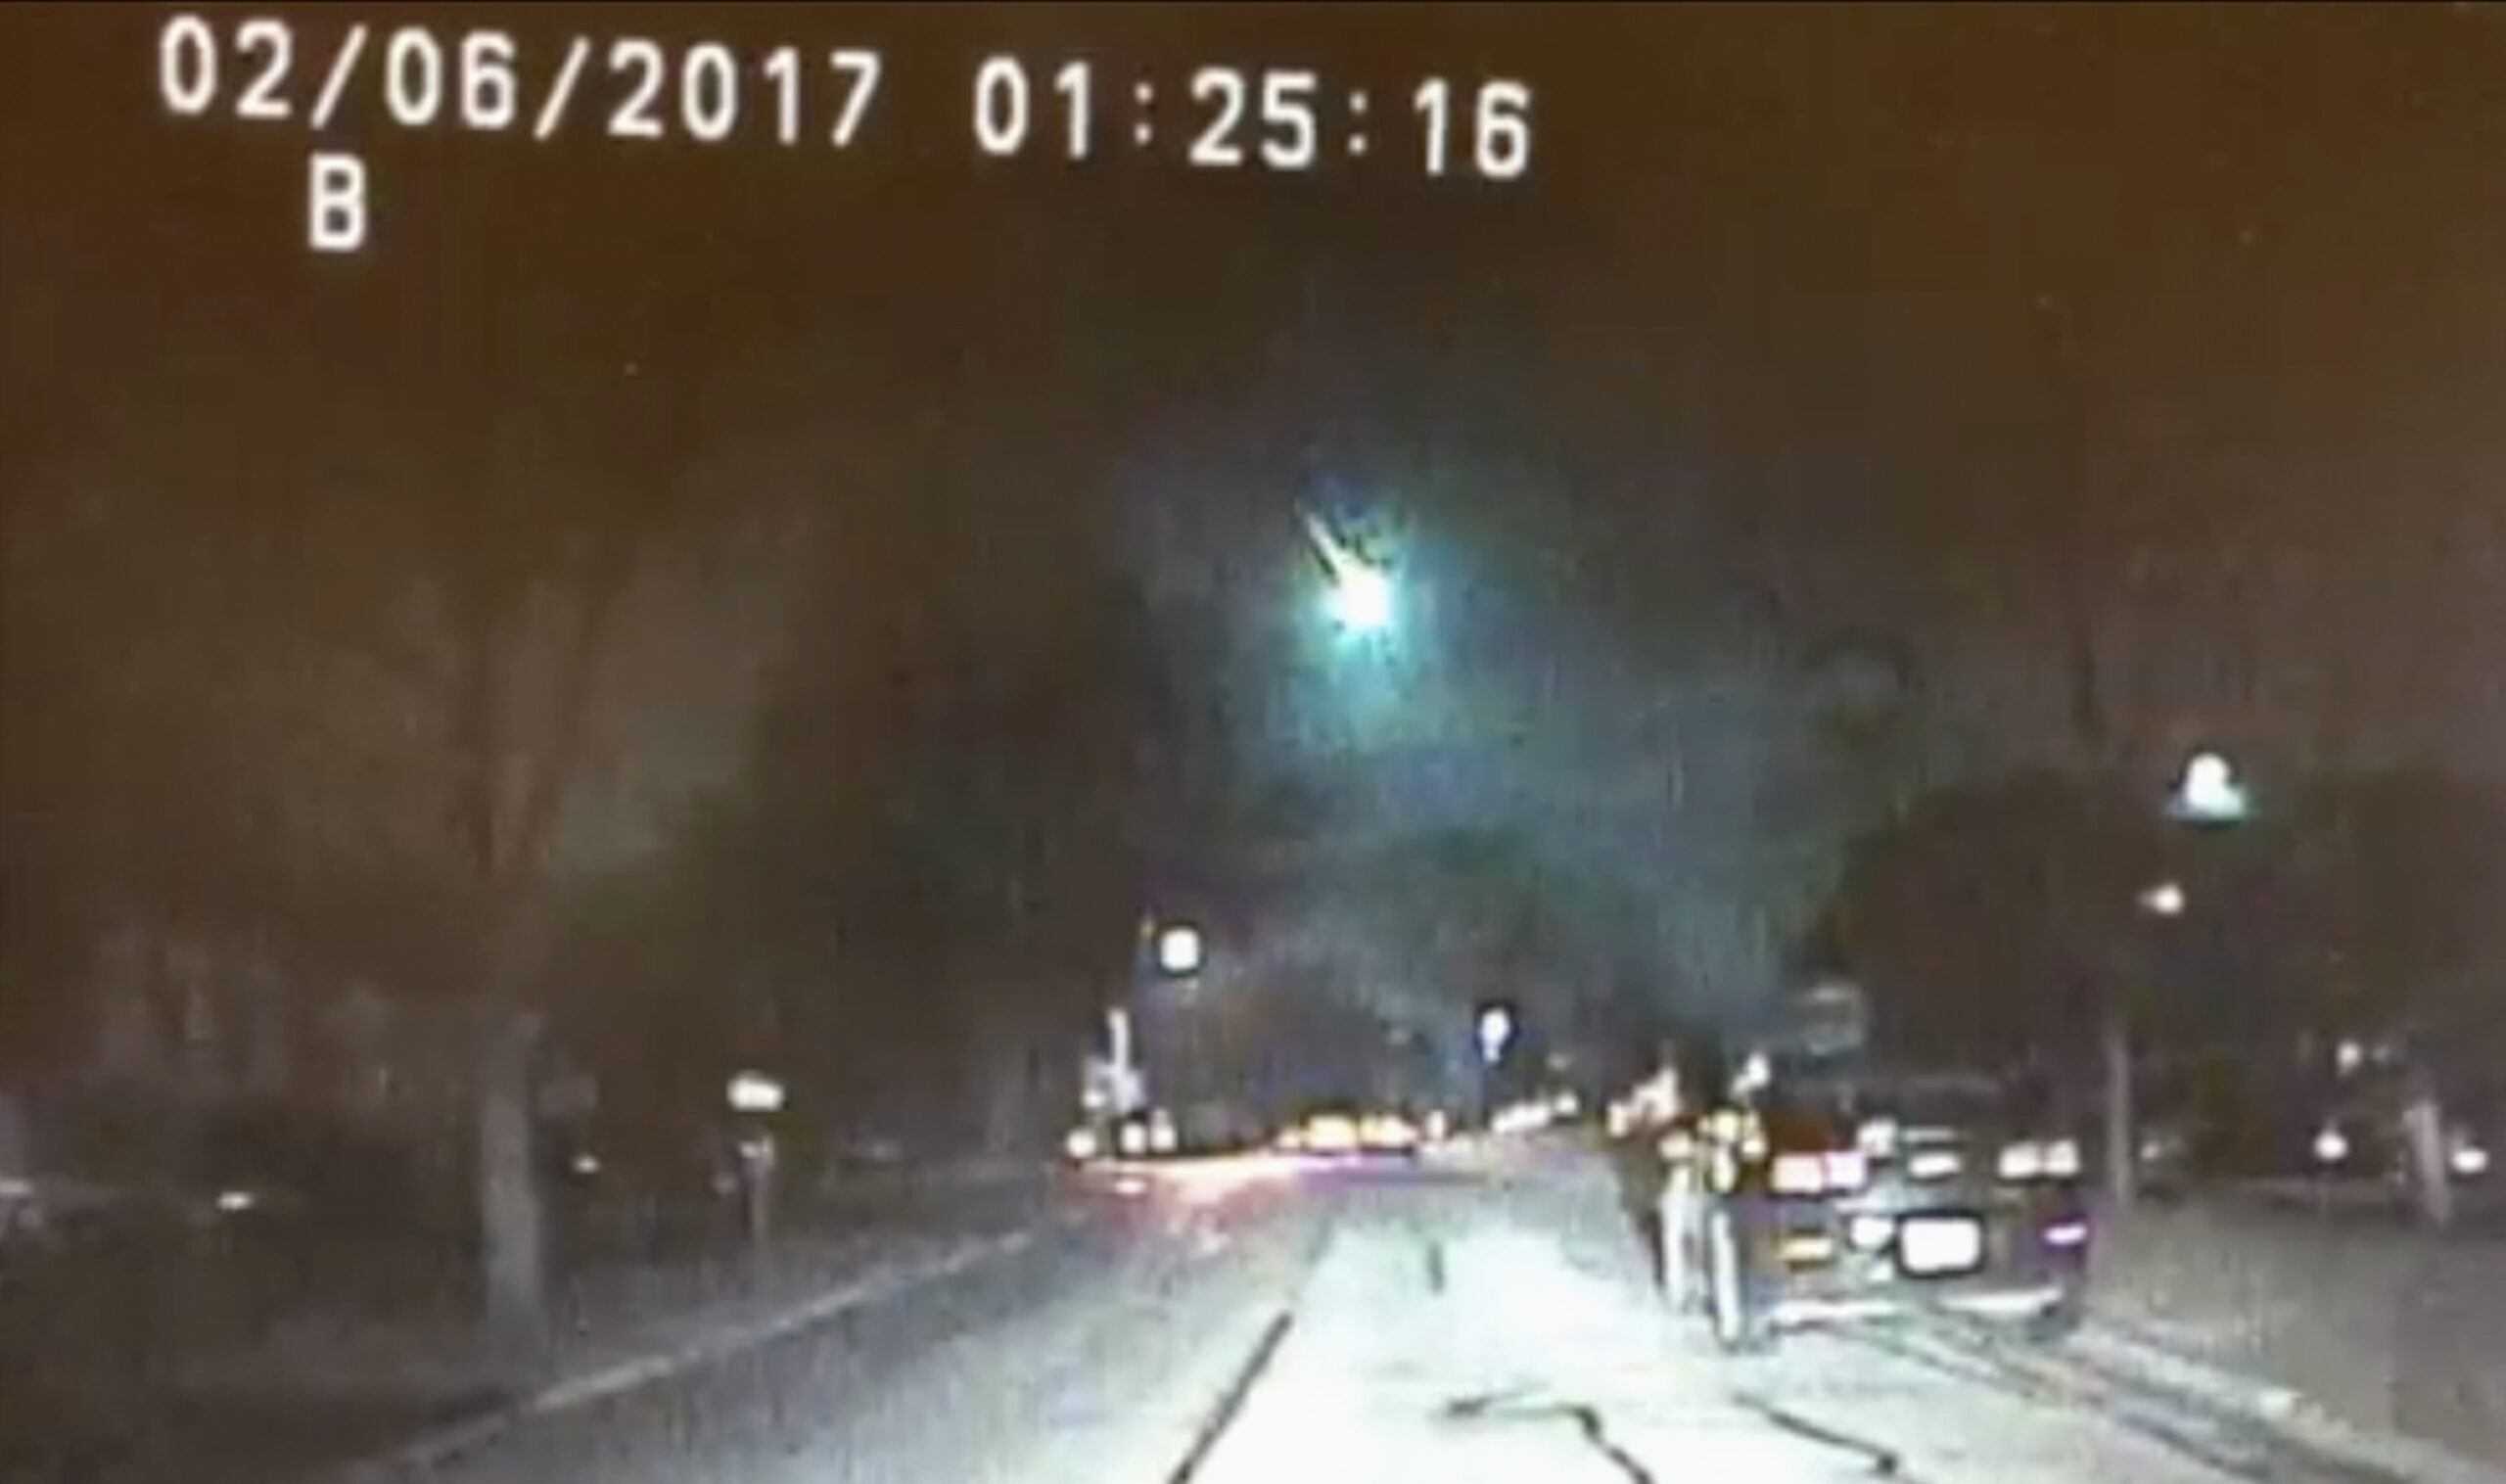 Dashcam video showing a meteor as it streaked over Lake Michigan early Monday morning, Feb. 6, 2017